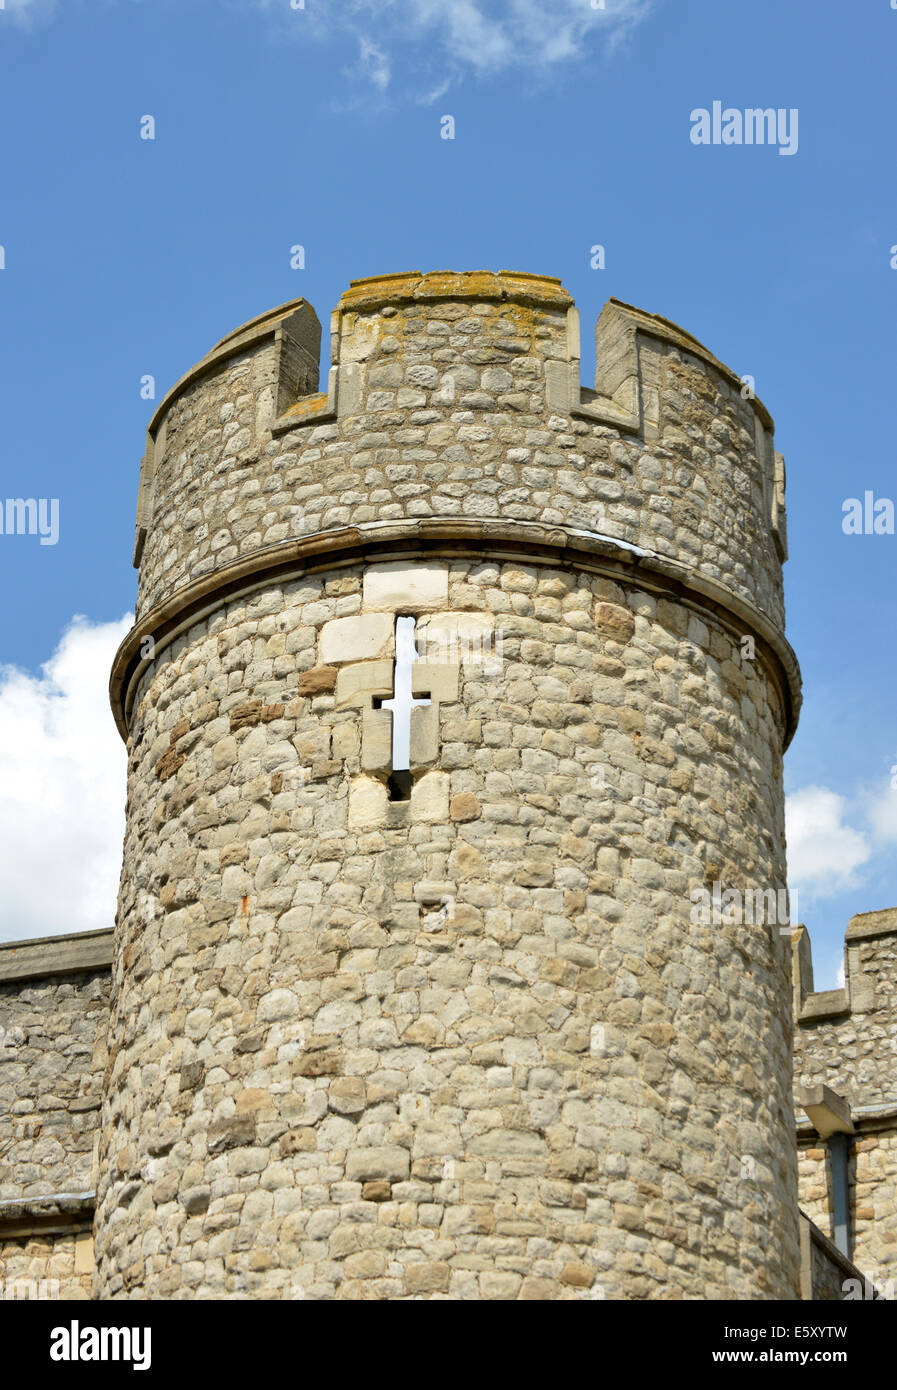 Battlements and arrow slit on a round tower of the Tower of London's walls Stock Photo